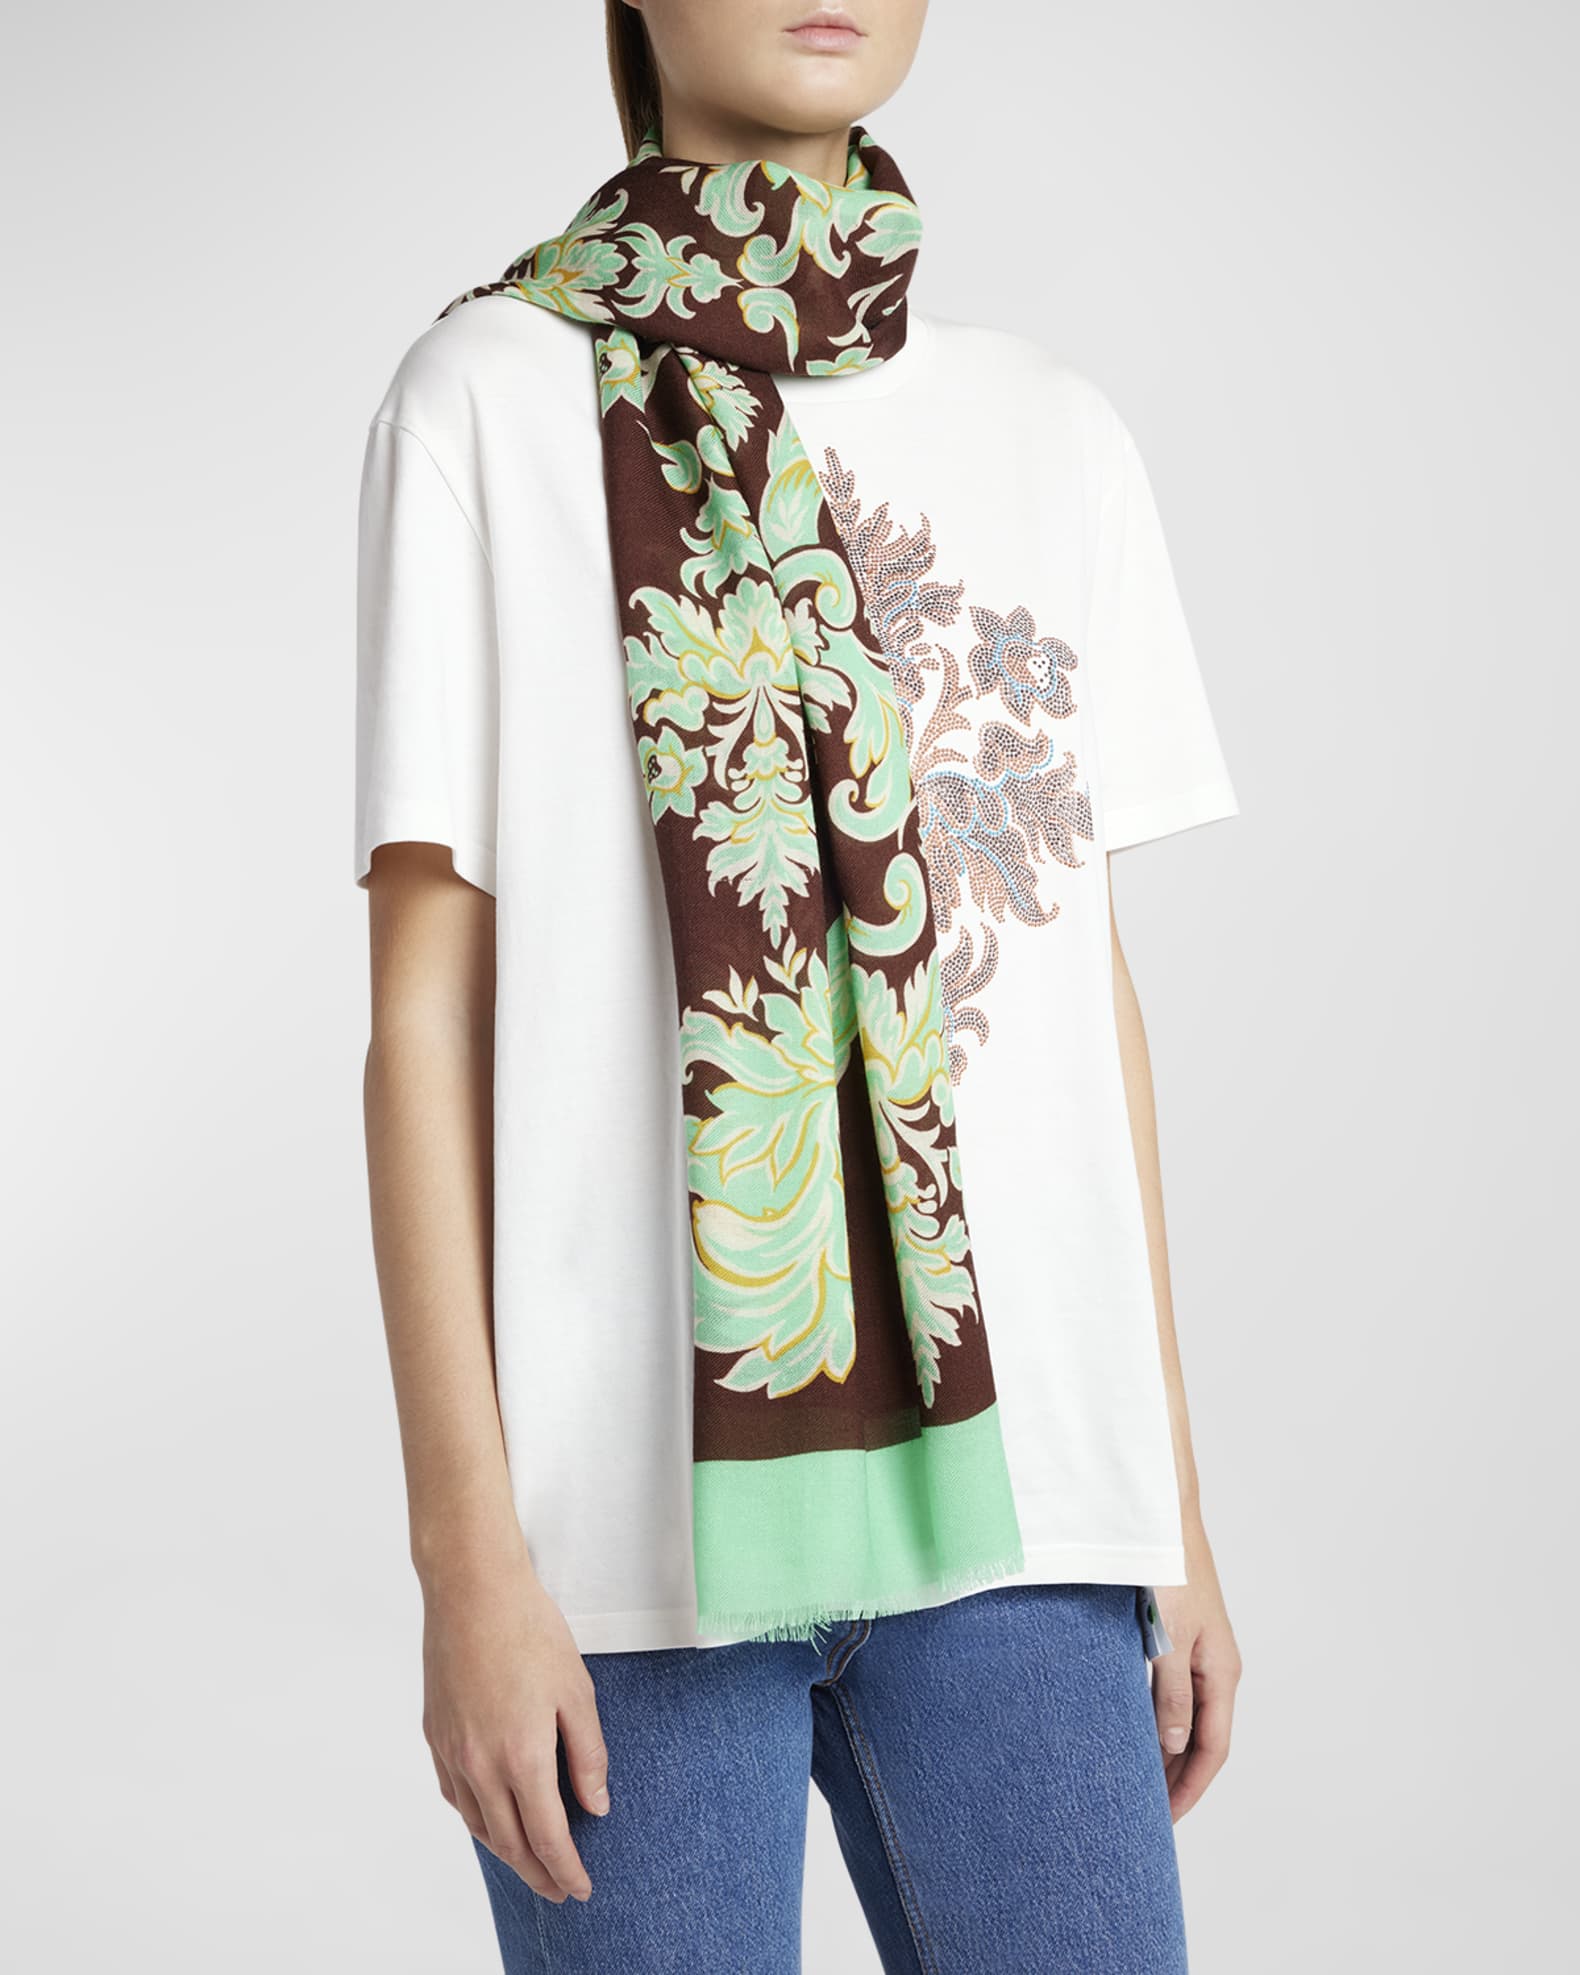 ETRO floral-print cashmere scarf - Brown